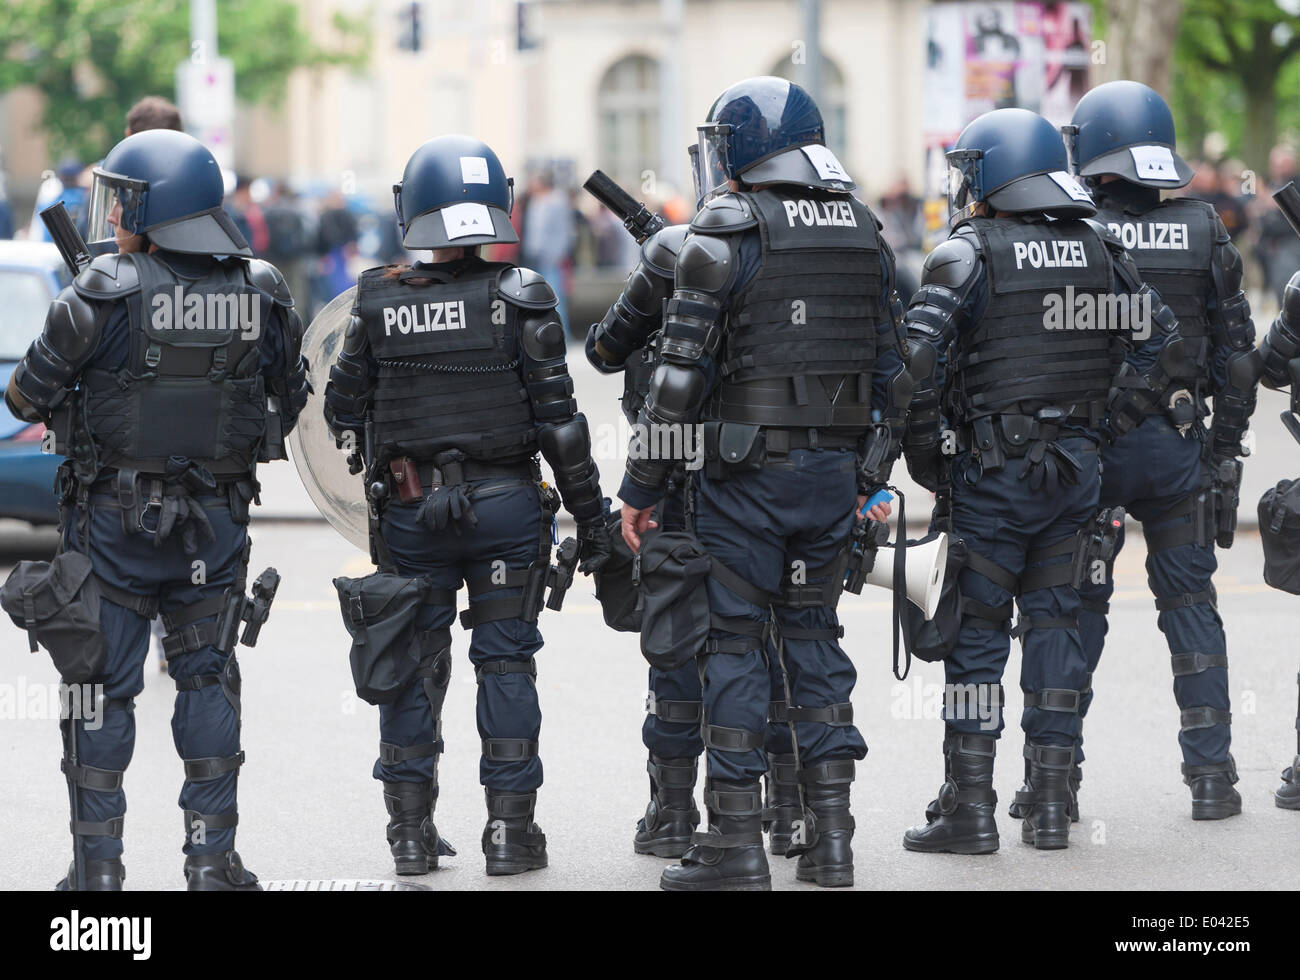 Zurich, Switzerland. 1st May, 2014. Armed police forces are deployed at an illegal May Day protest rally at Zurich's Helvetiaplatz. The rally disbanded after police squads sealed the place for one hour. Credit:  Erik Tham/Alamy Live News Stock Photo